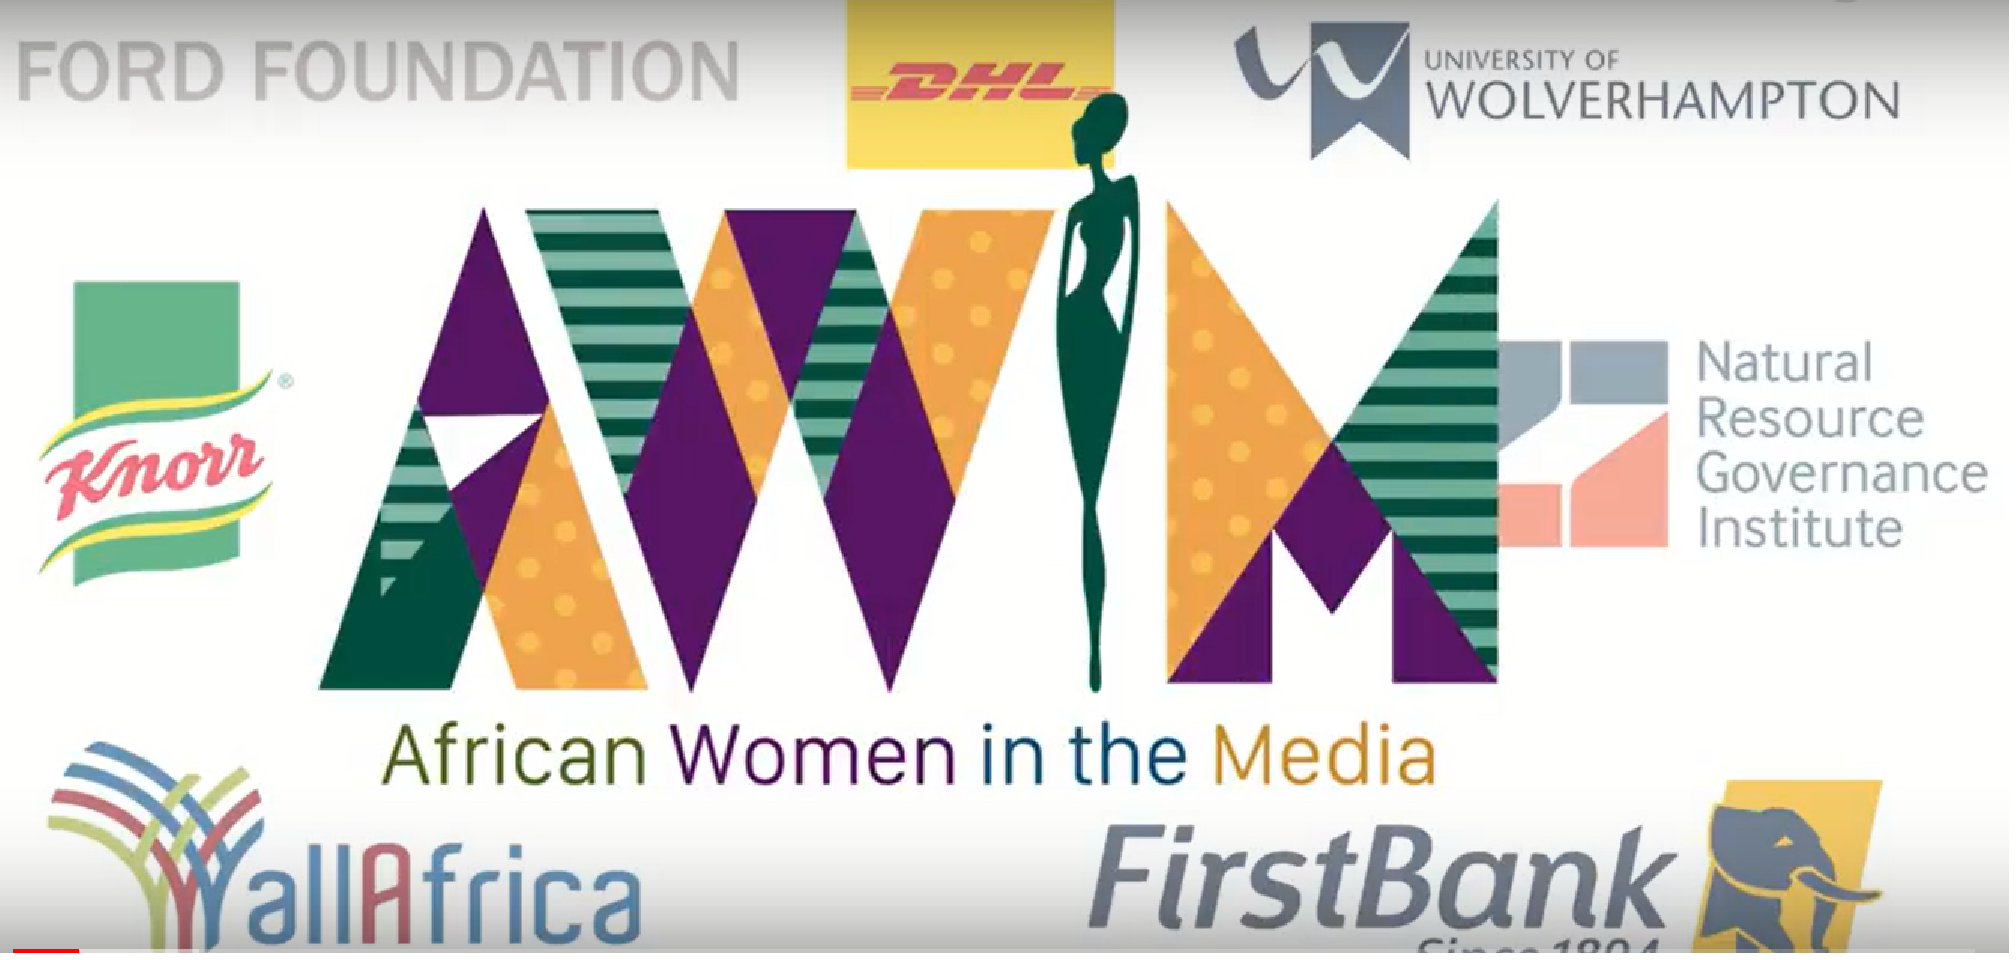  VIDEO: African Women in the Media 2018 #AWIM18